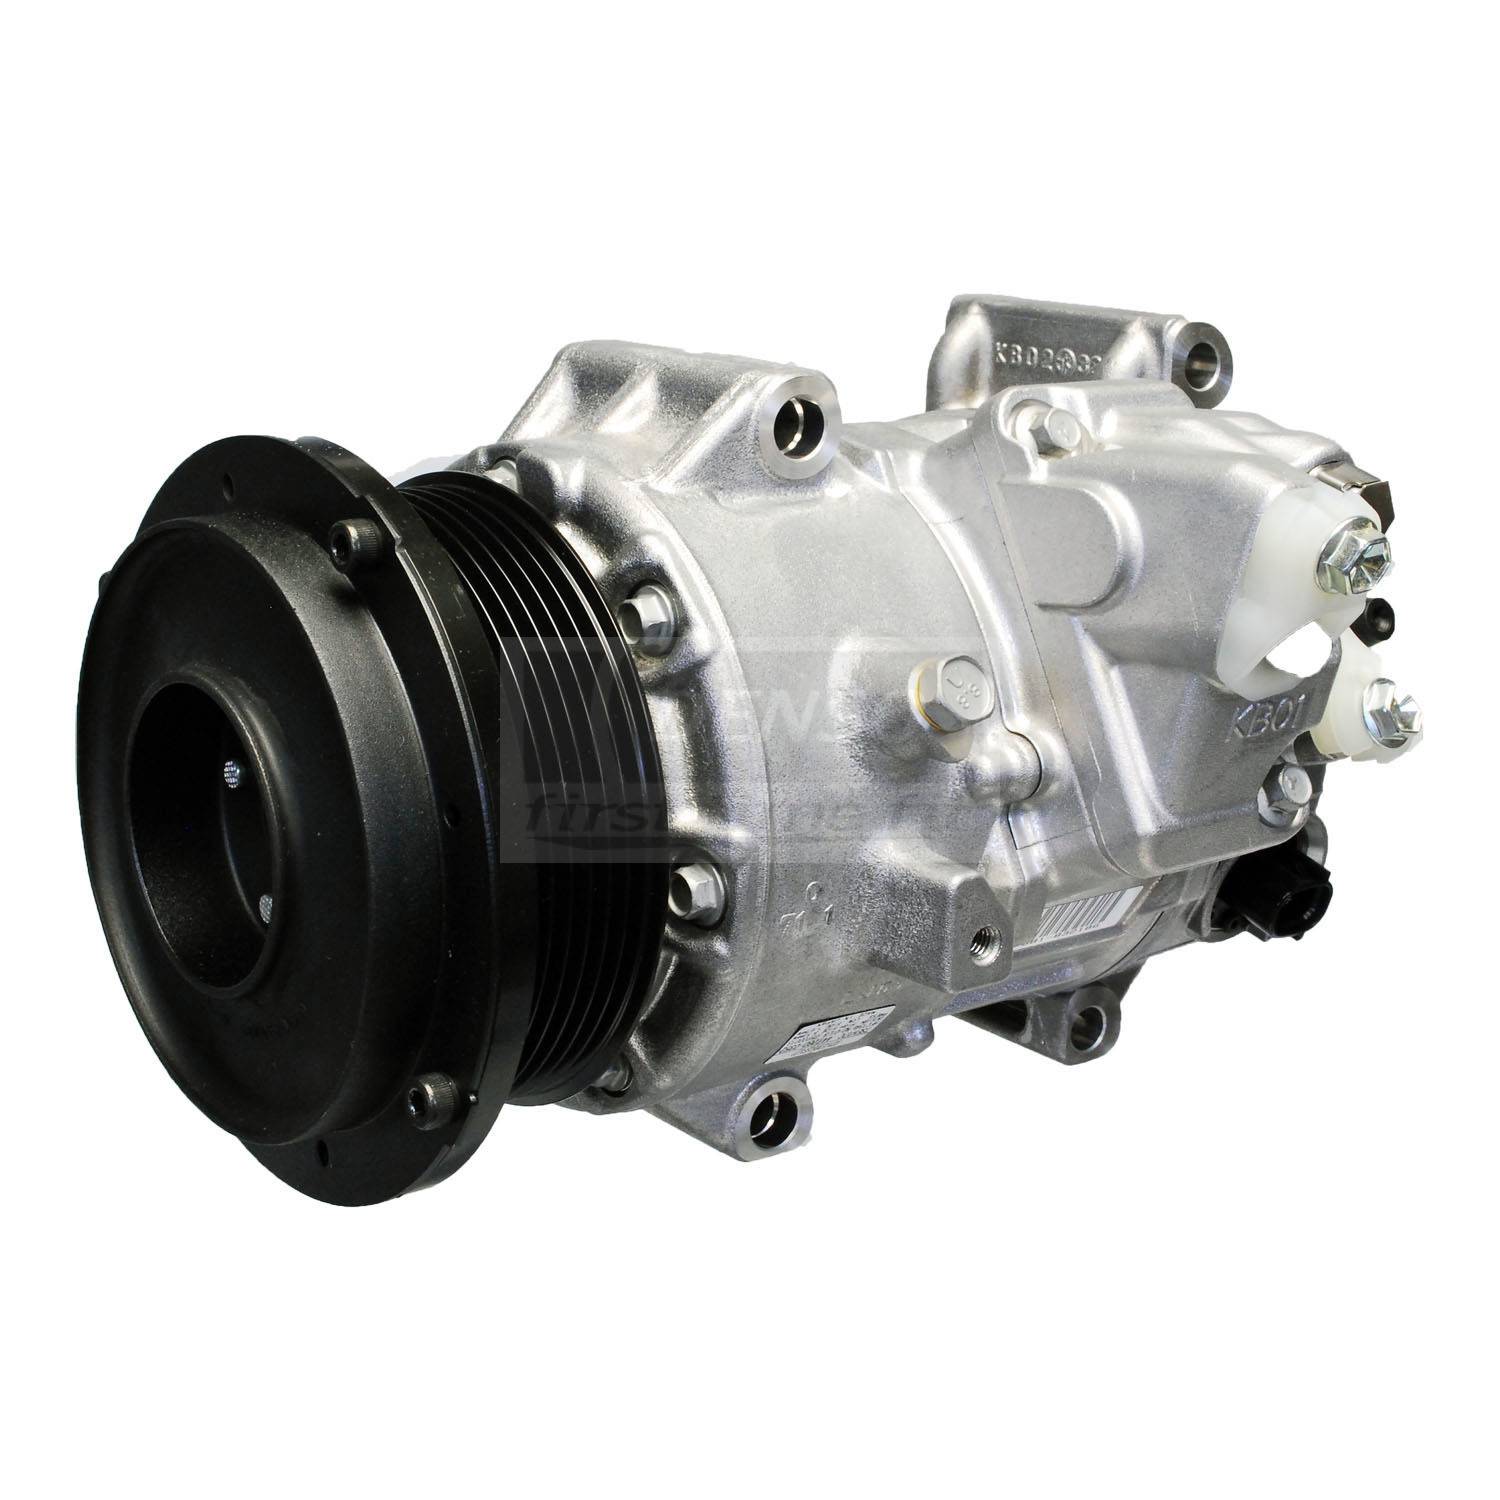 88310-0T020,883100T020 AC Compressor Assy for Toyota Highlandern and Toyota Venza.